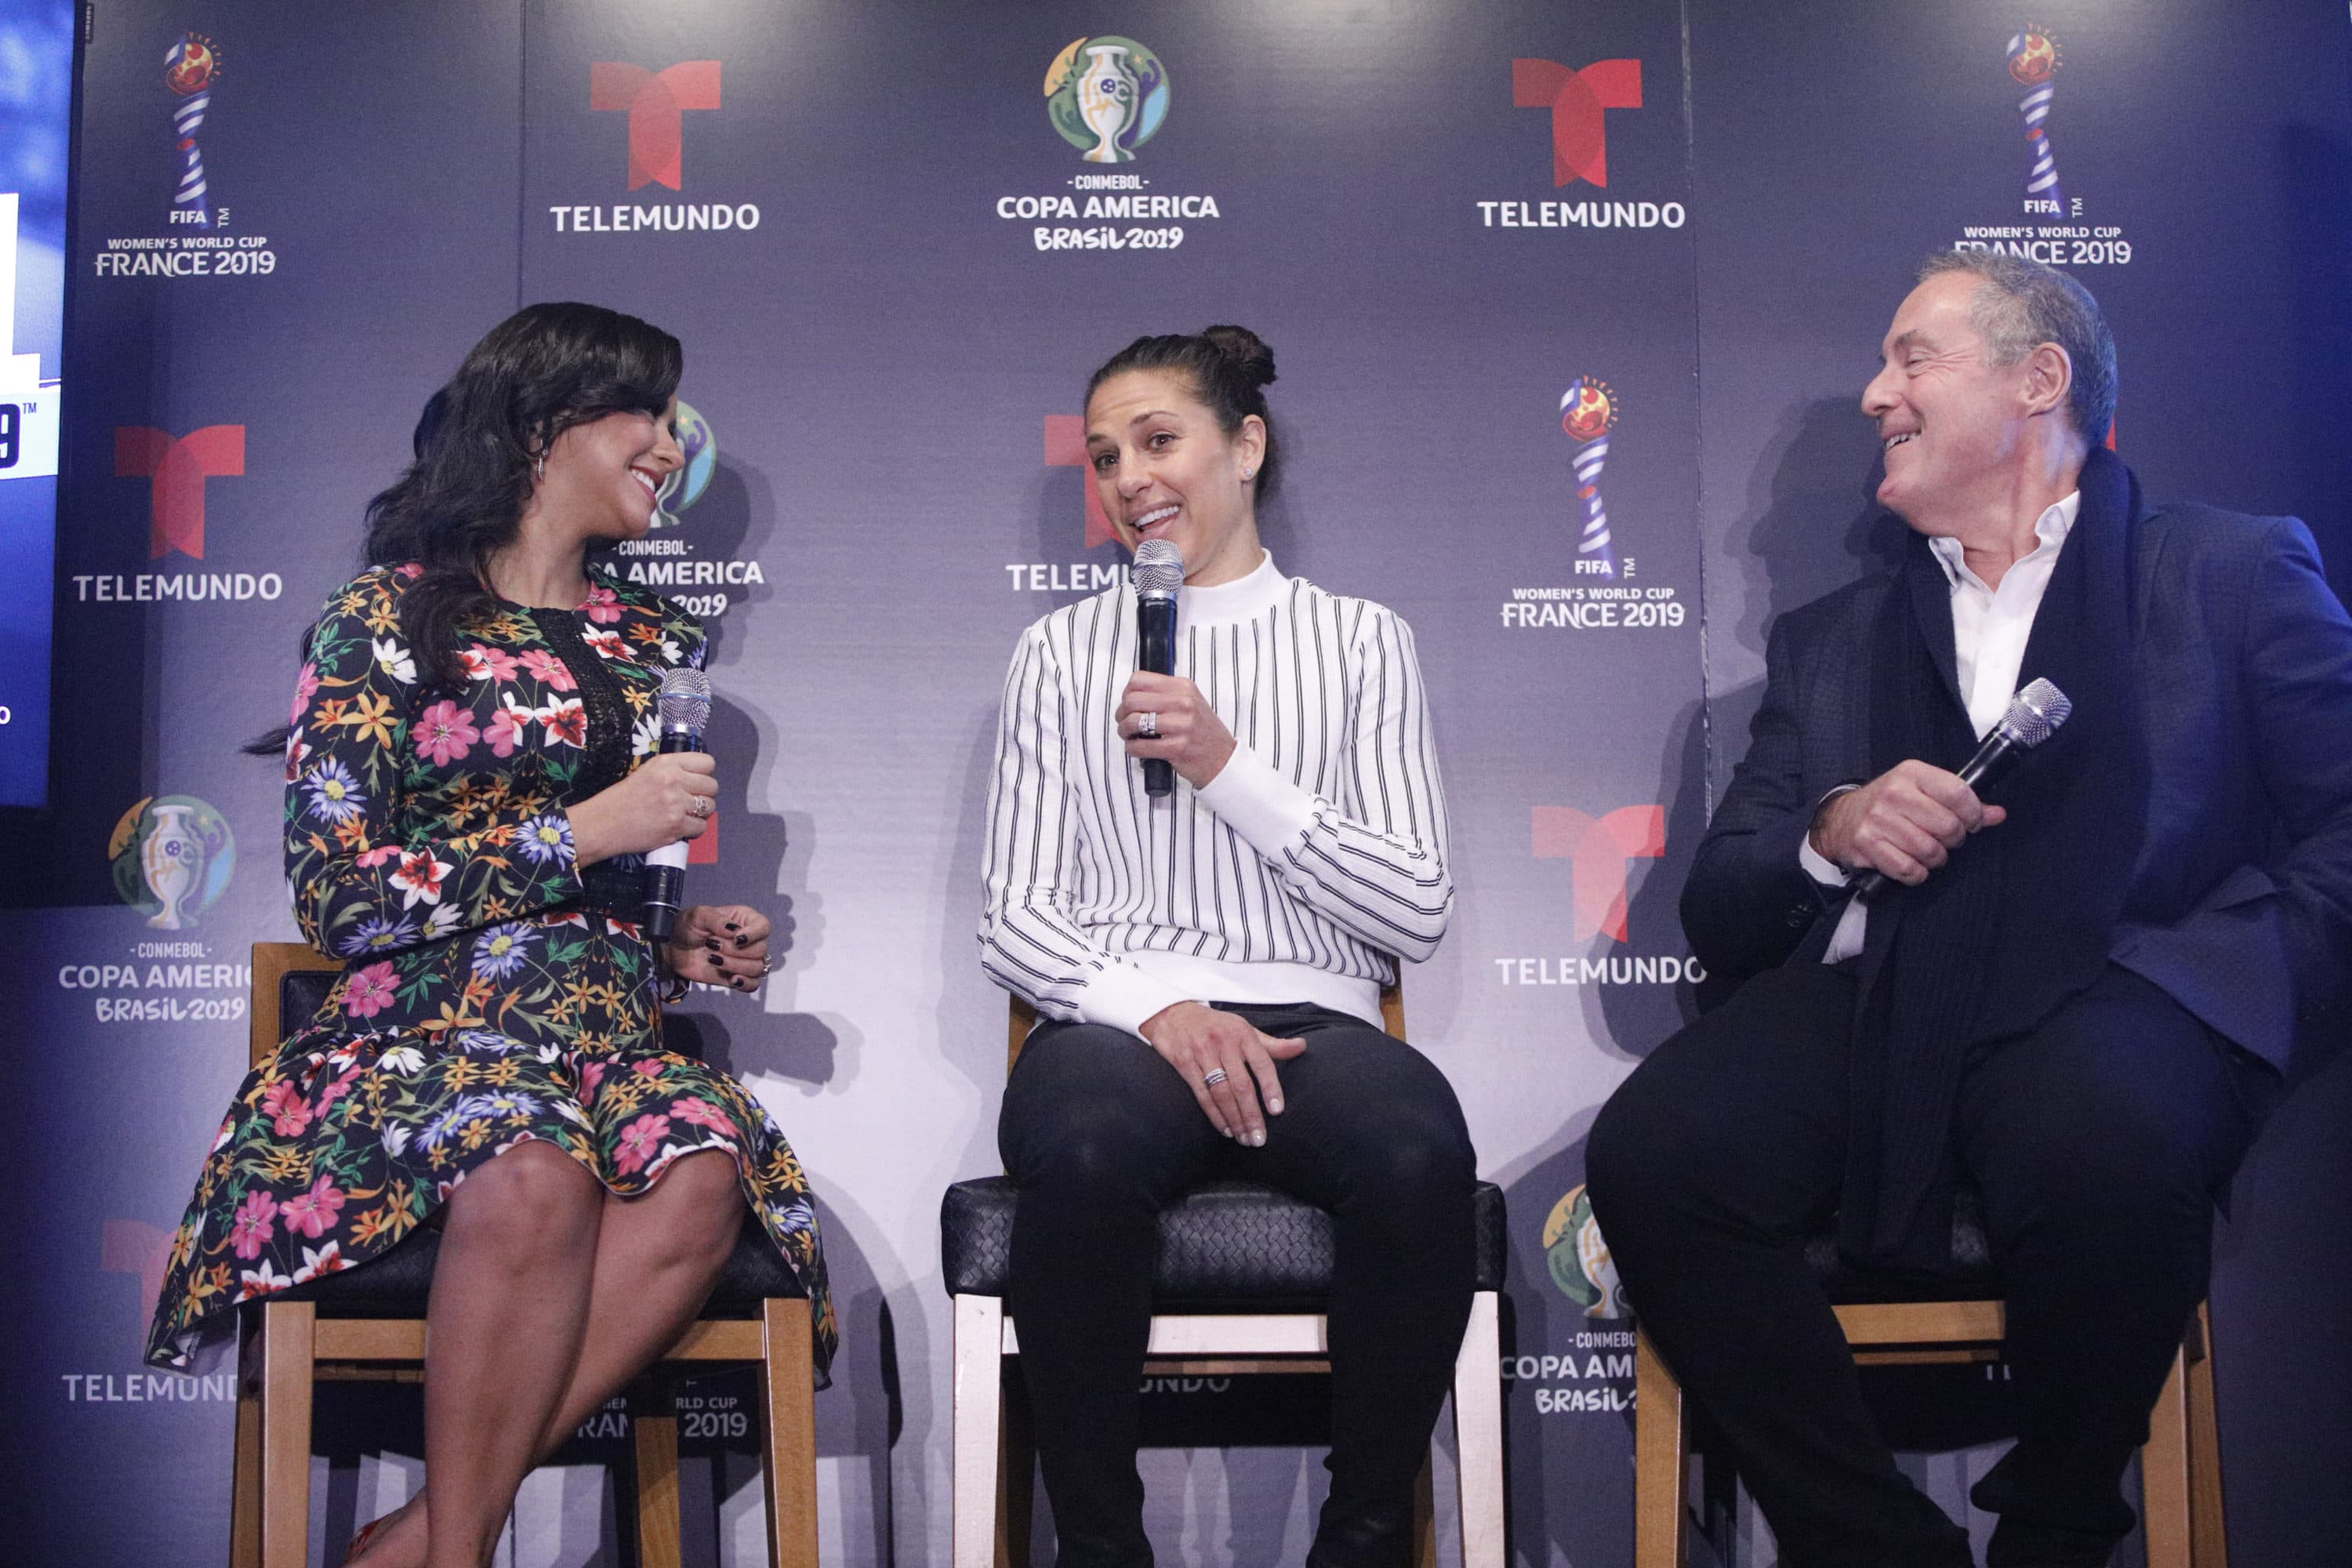 Telemundo initial plans for World Cup coverage - World Soccer Talk